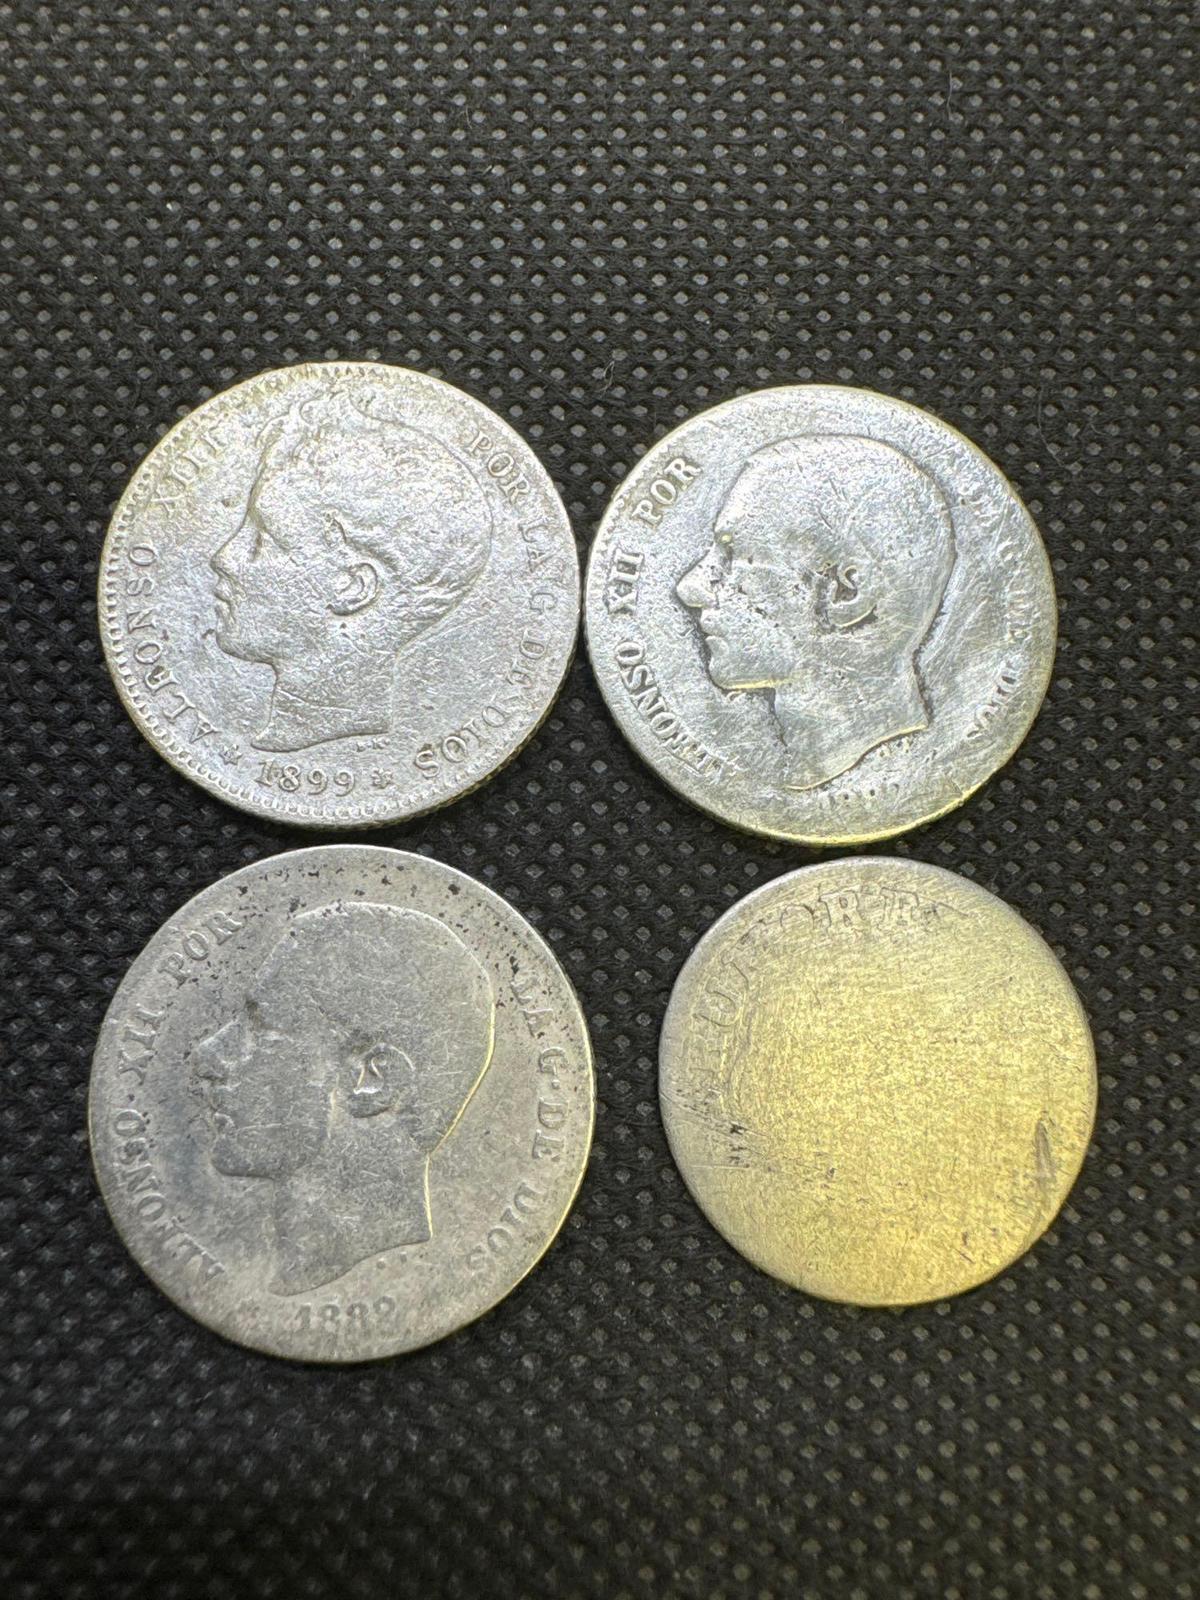 4 Silver House Of Borbon Spanish Monarchy Coins From The 1800s